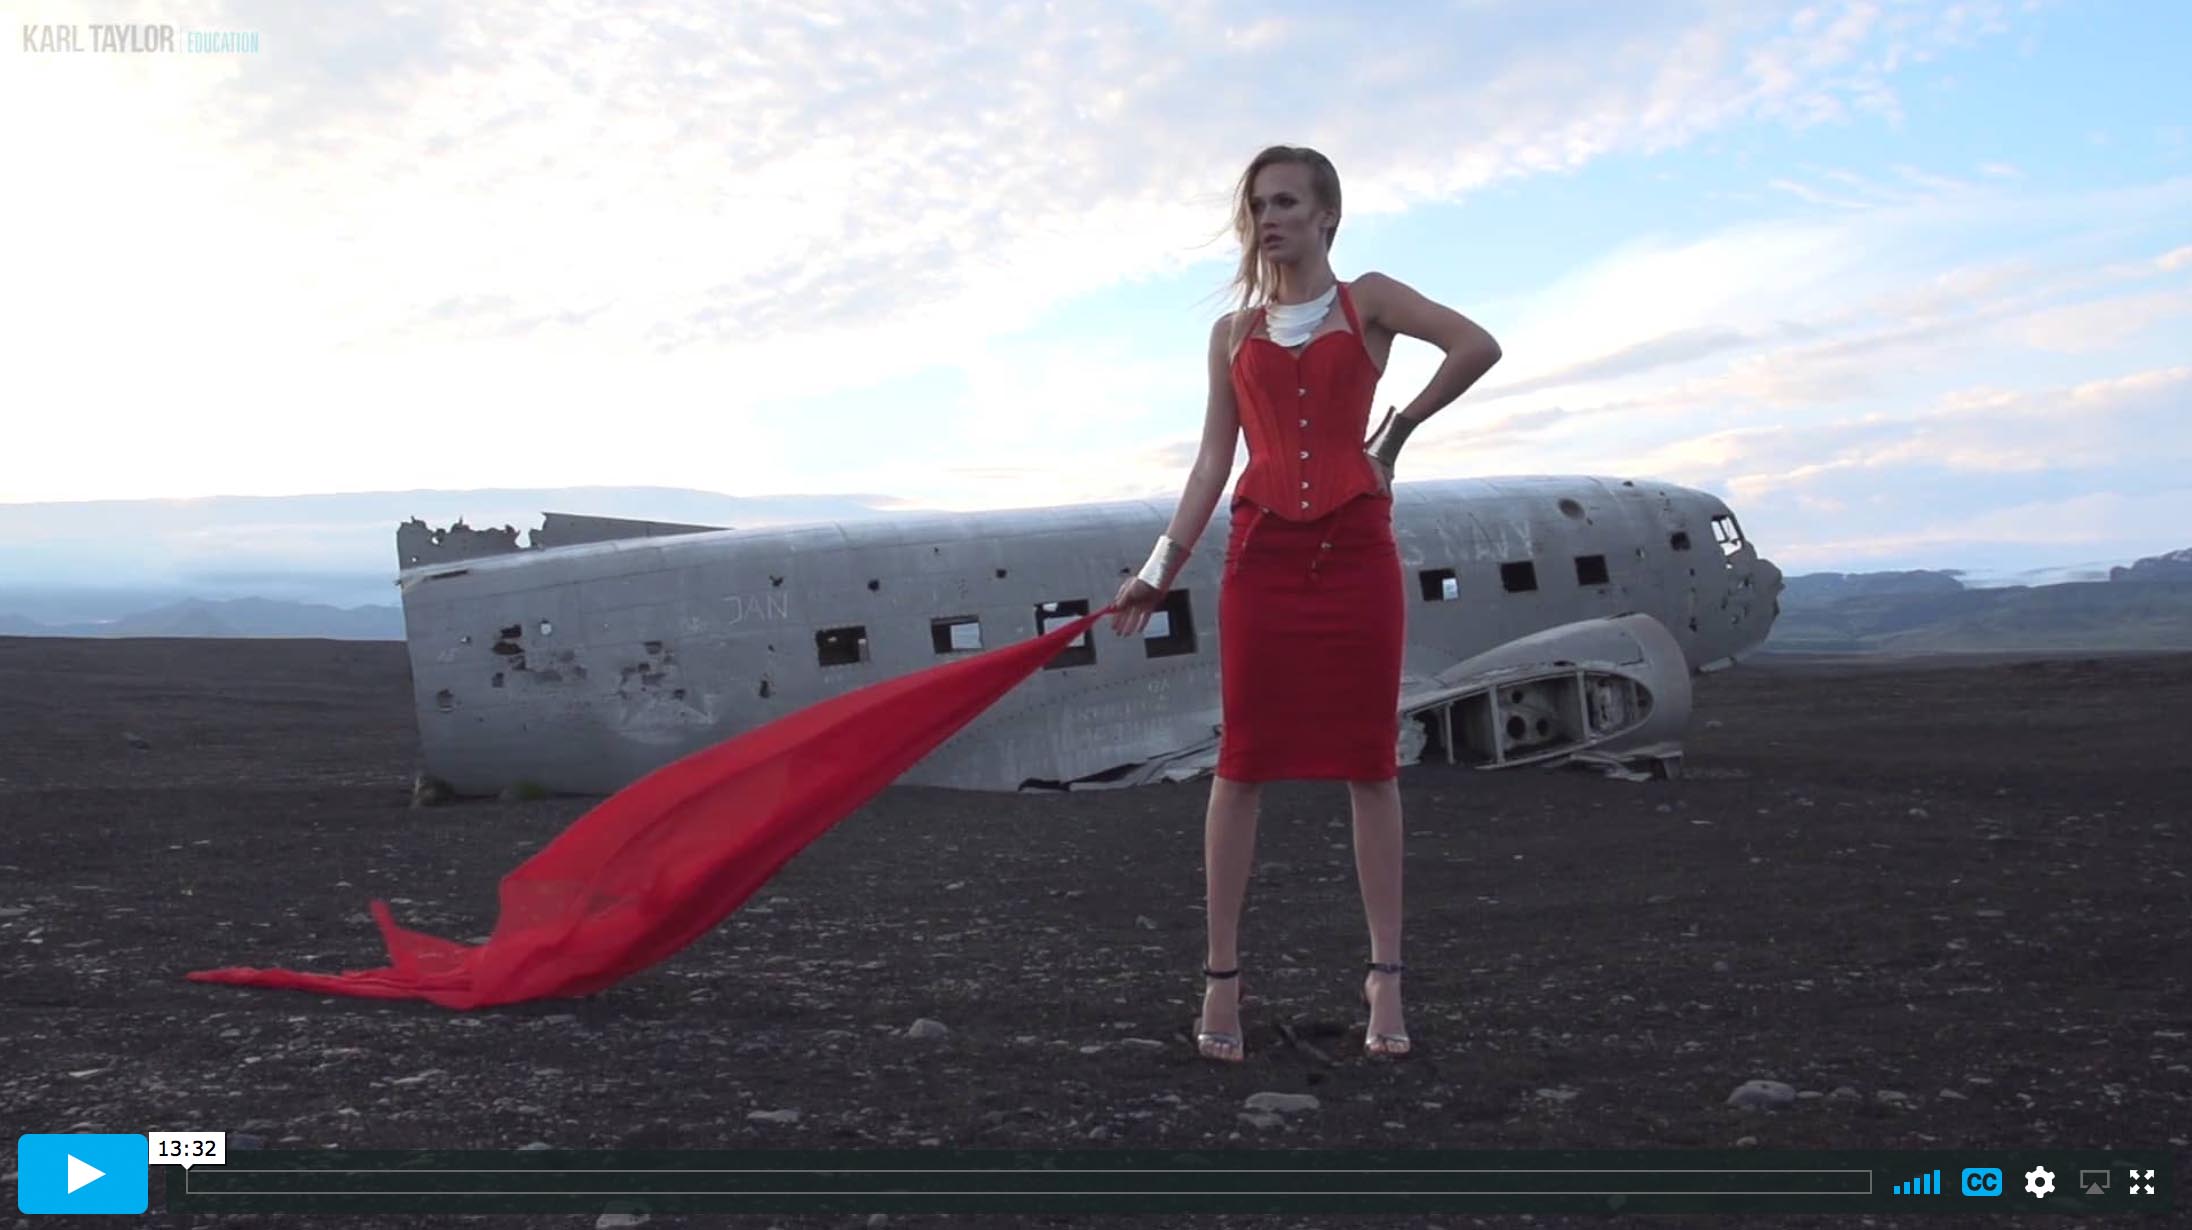 Fashion Shoot at the Site of the DC3 Plane Crash